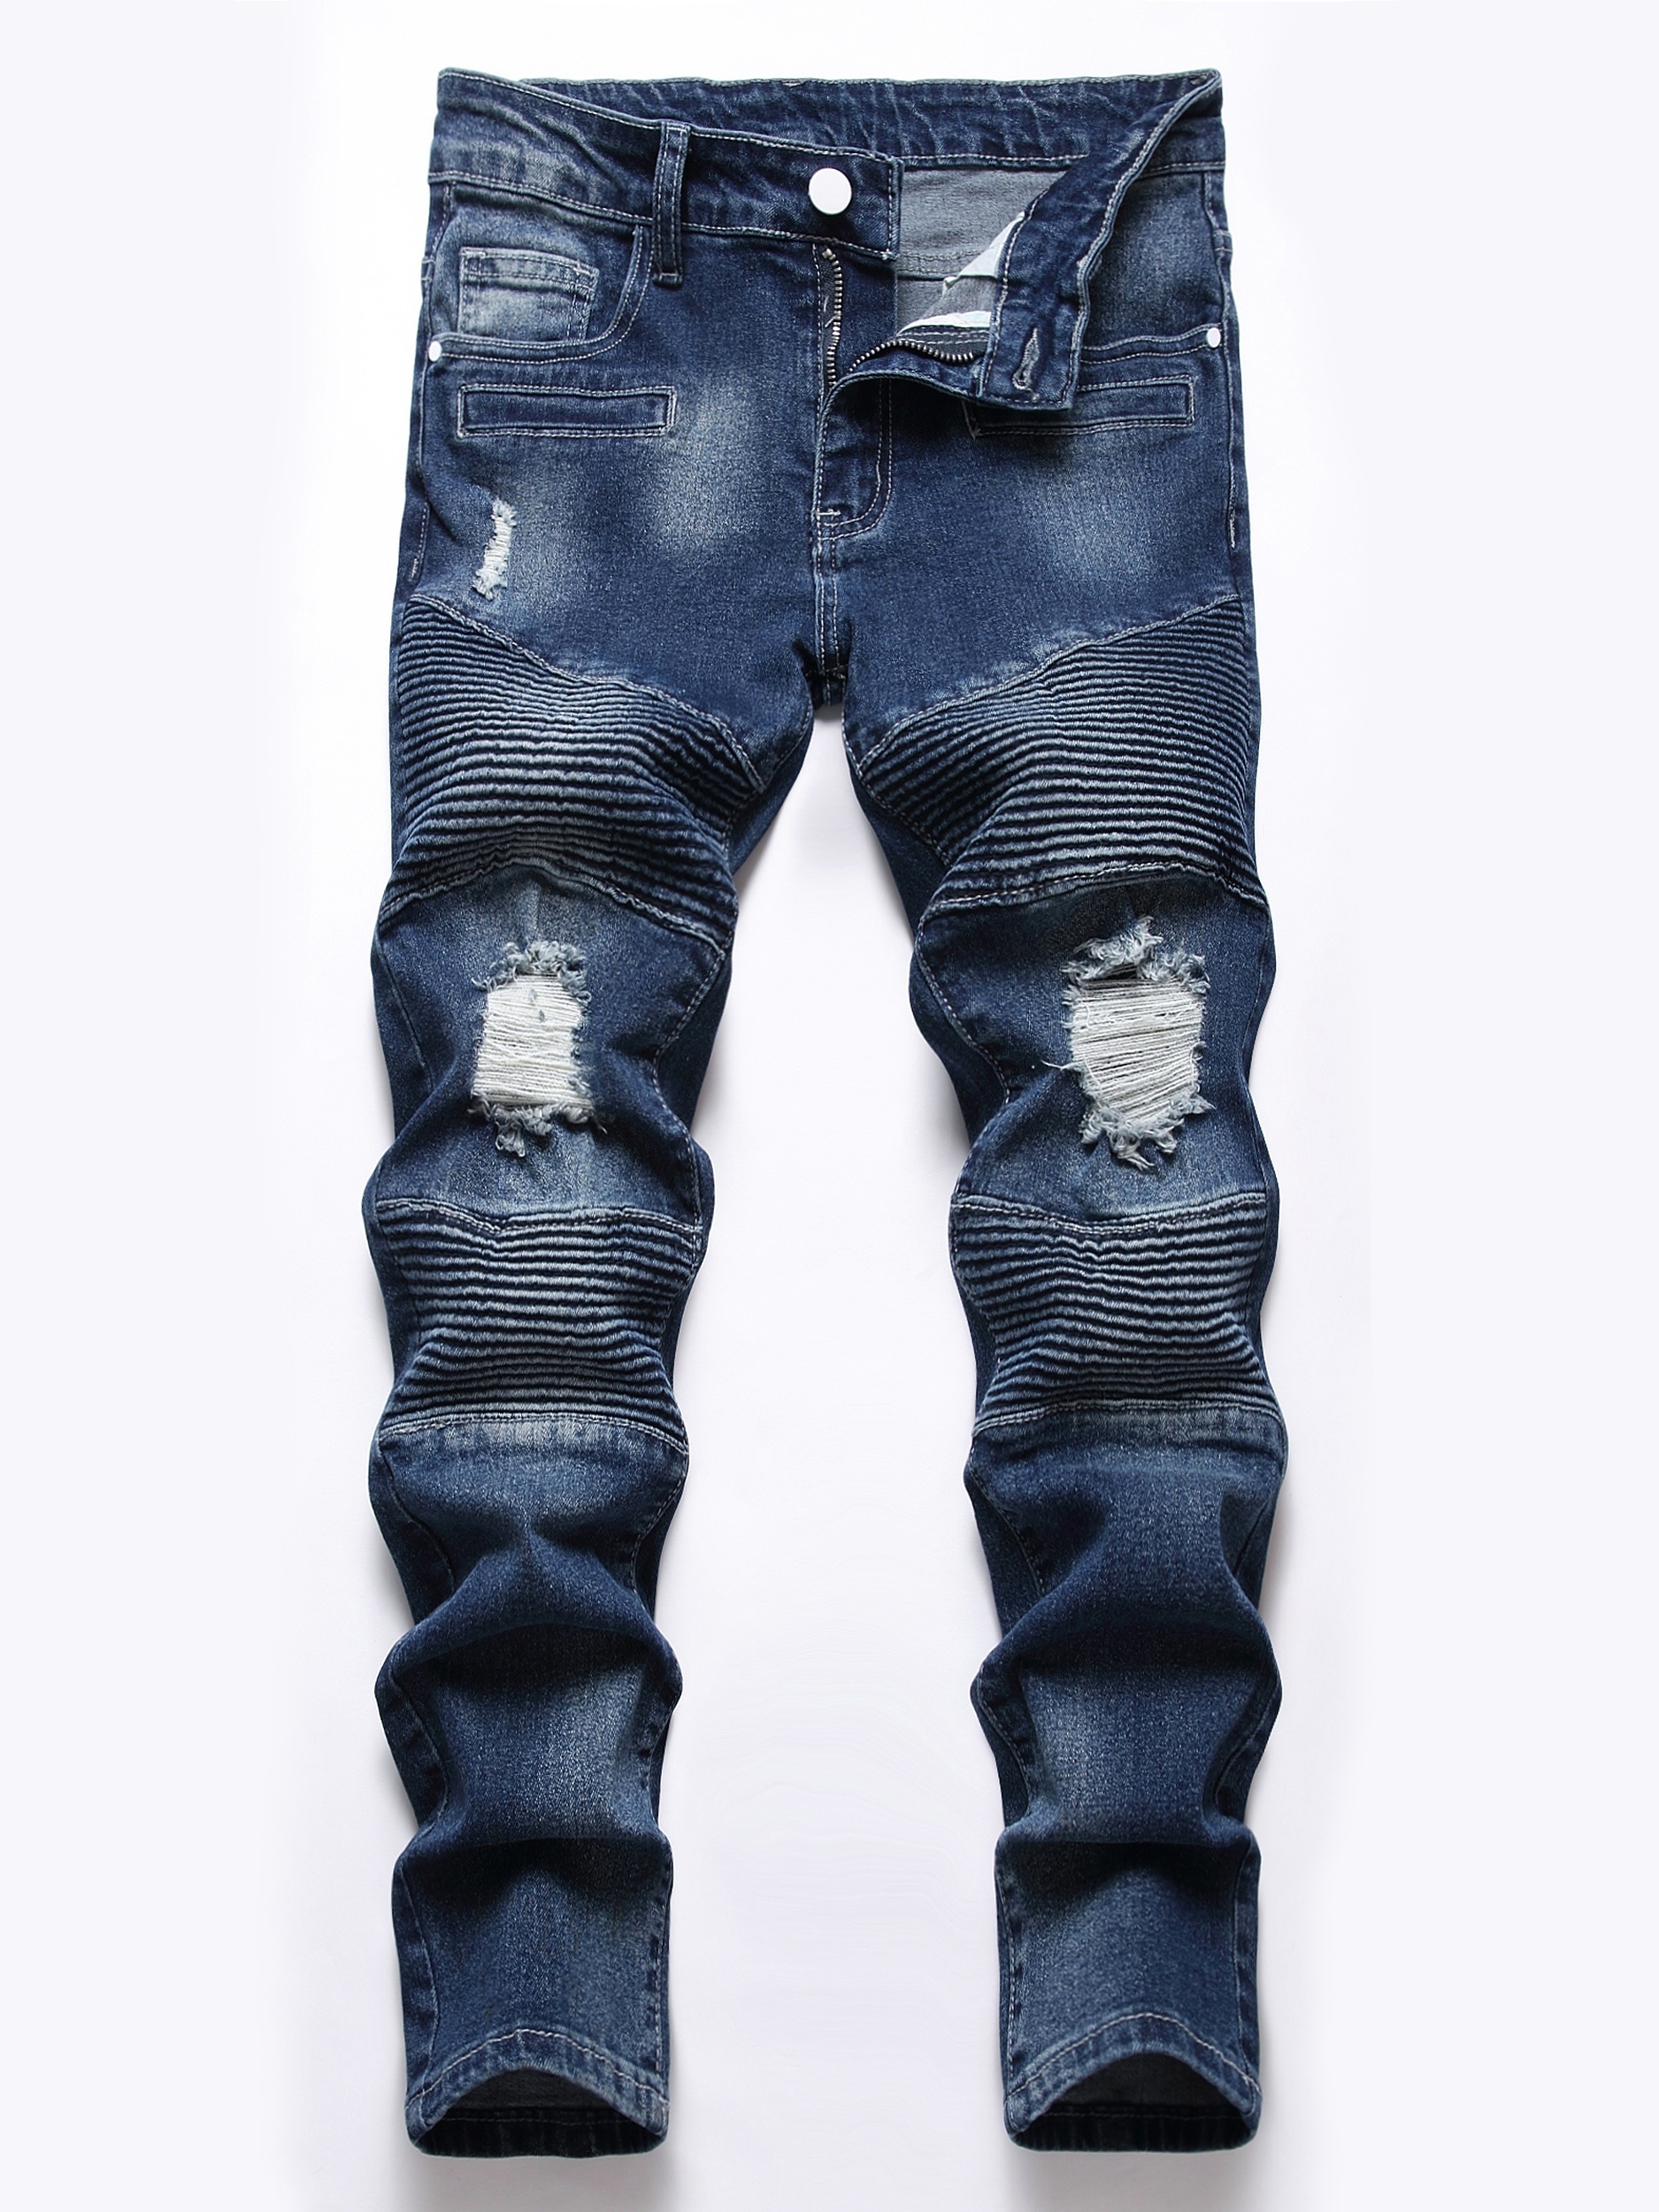 Boys Ripped Distressed Stretch Wrinkled Jeans Skinny Slim Fit Denim Pants  Kids Clothes